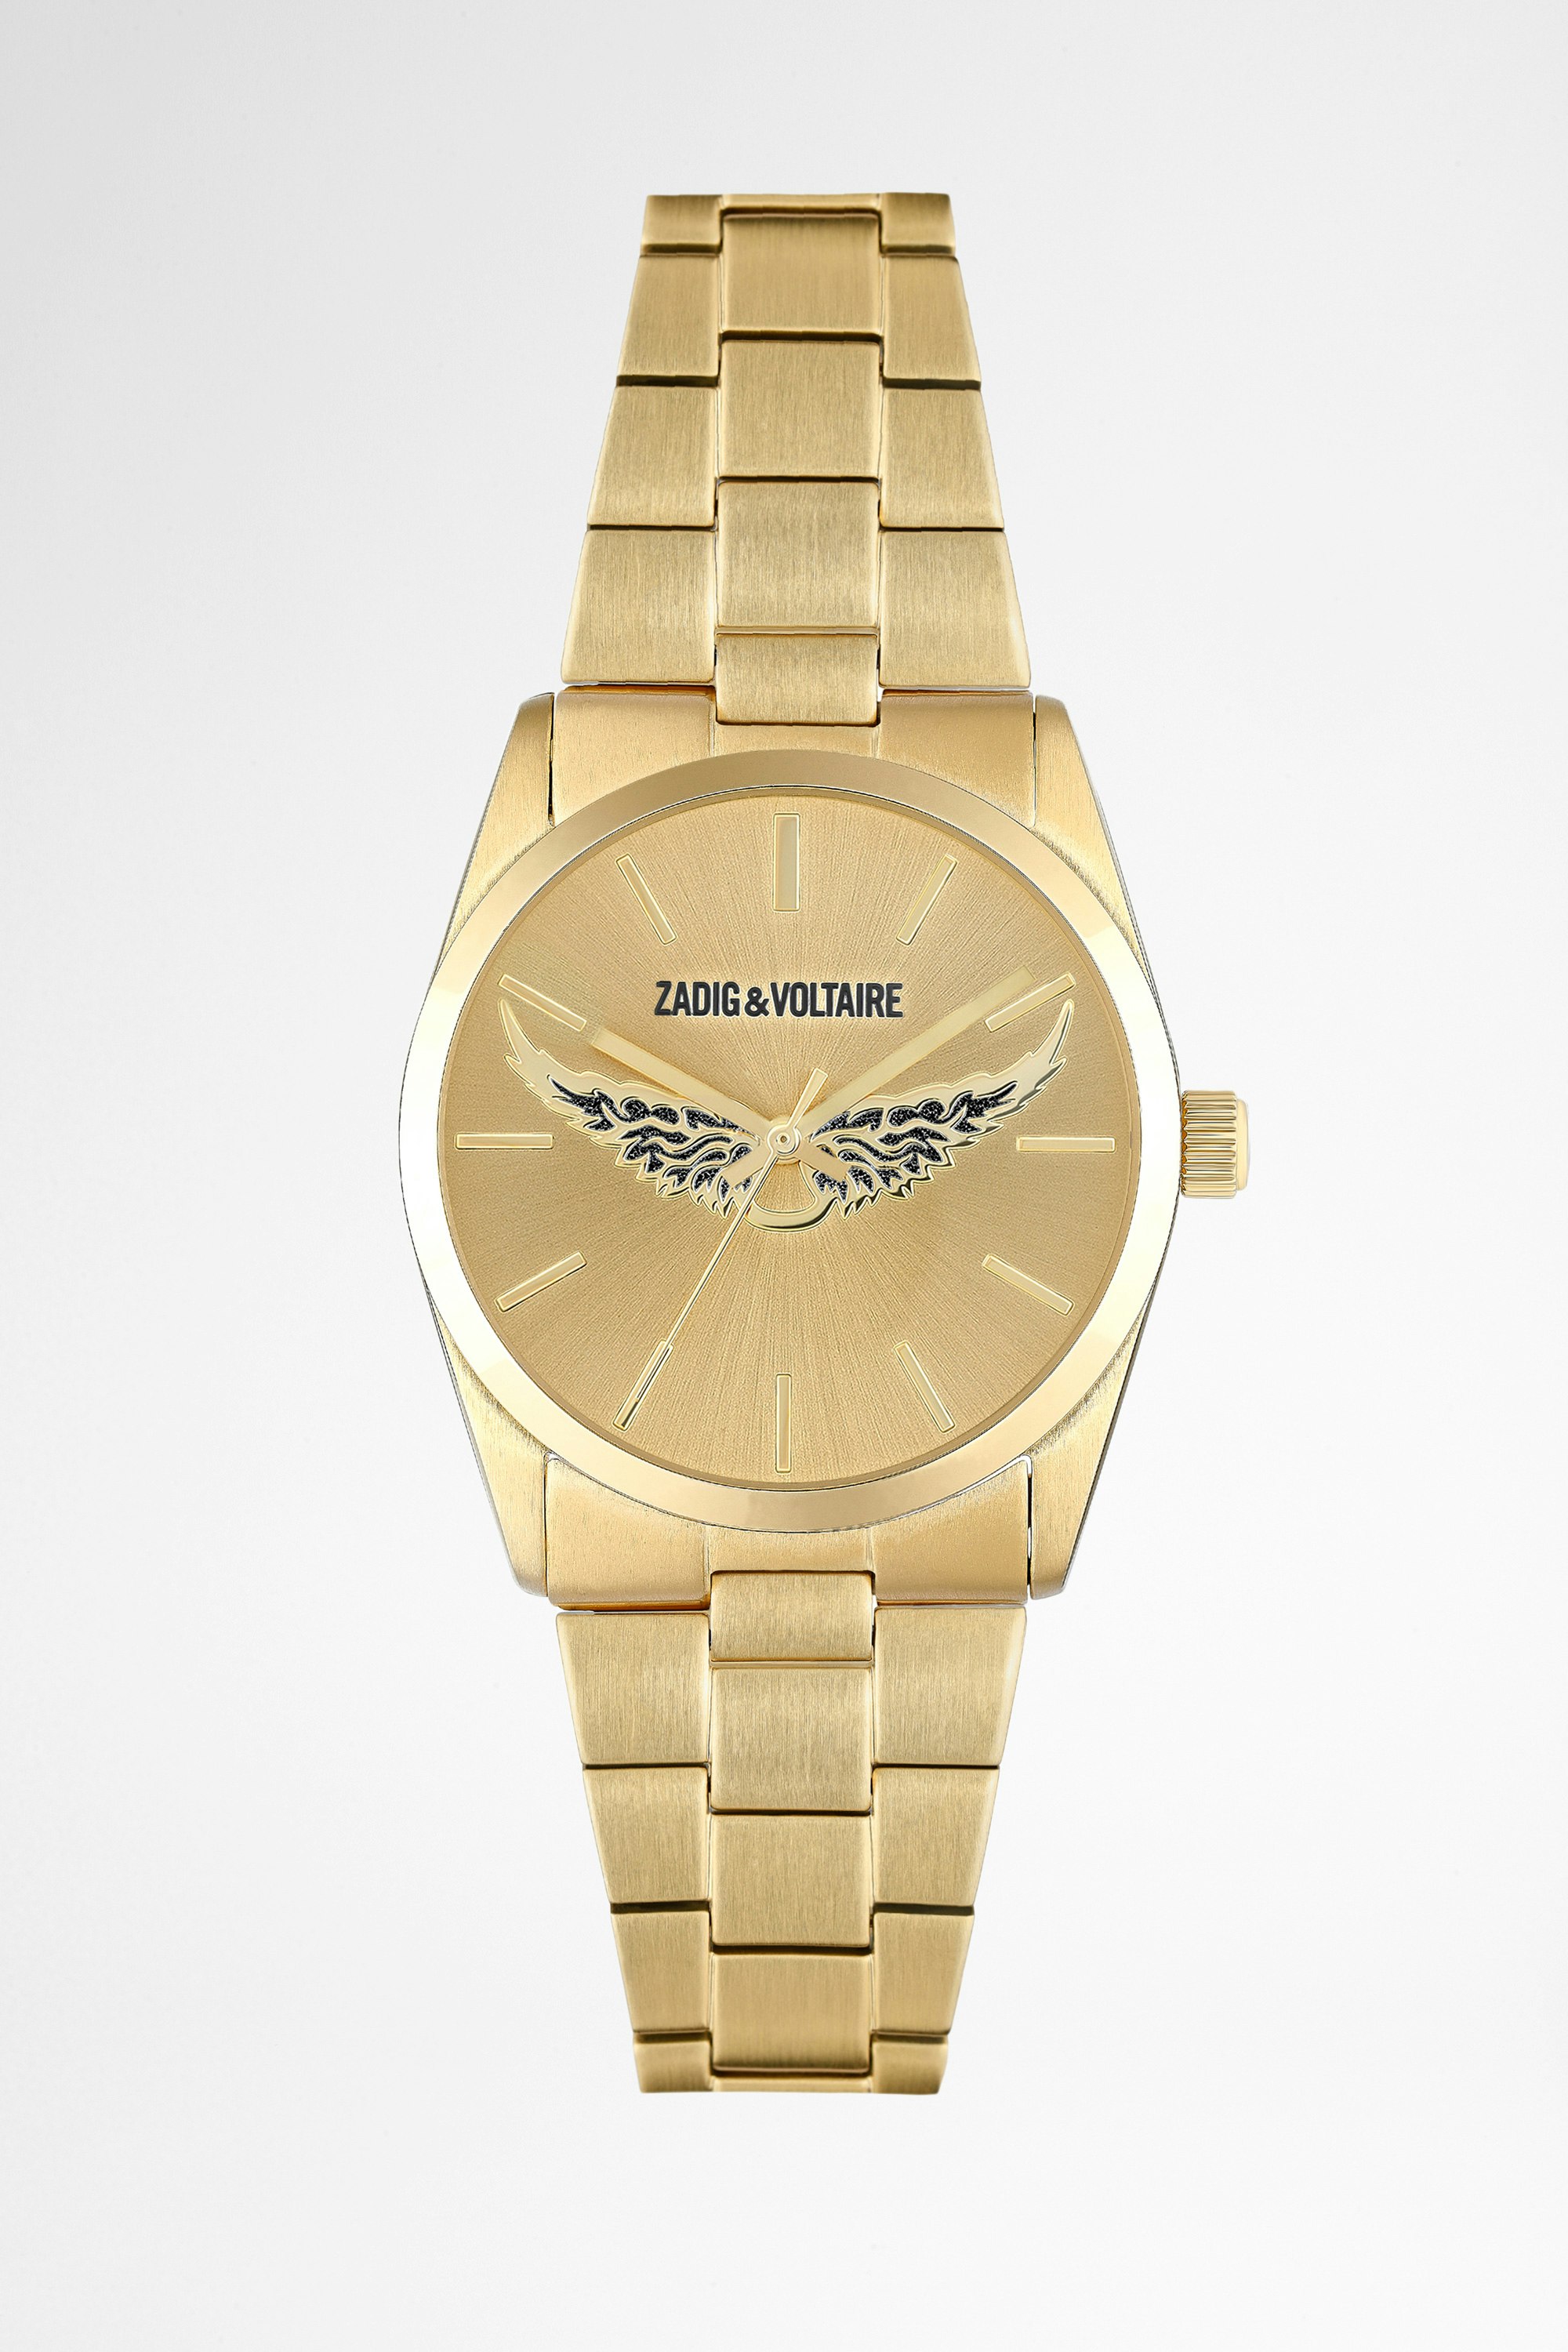 Fusion Gold Wings ウォッチ Women's steel watch in gold with wings